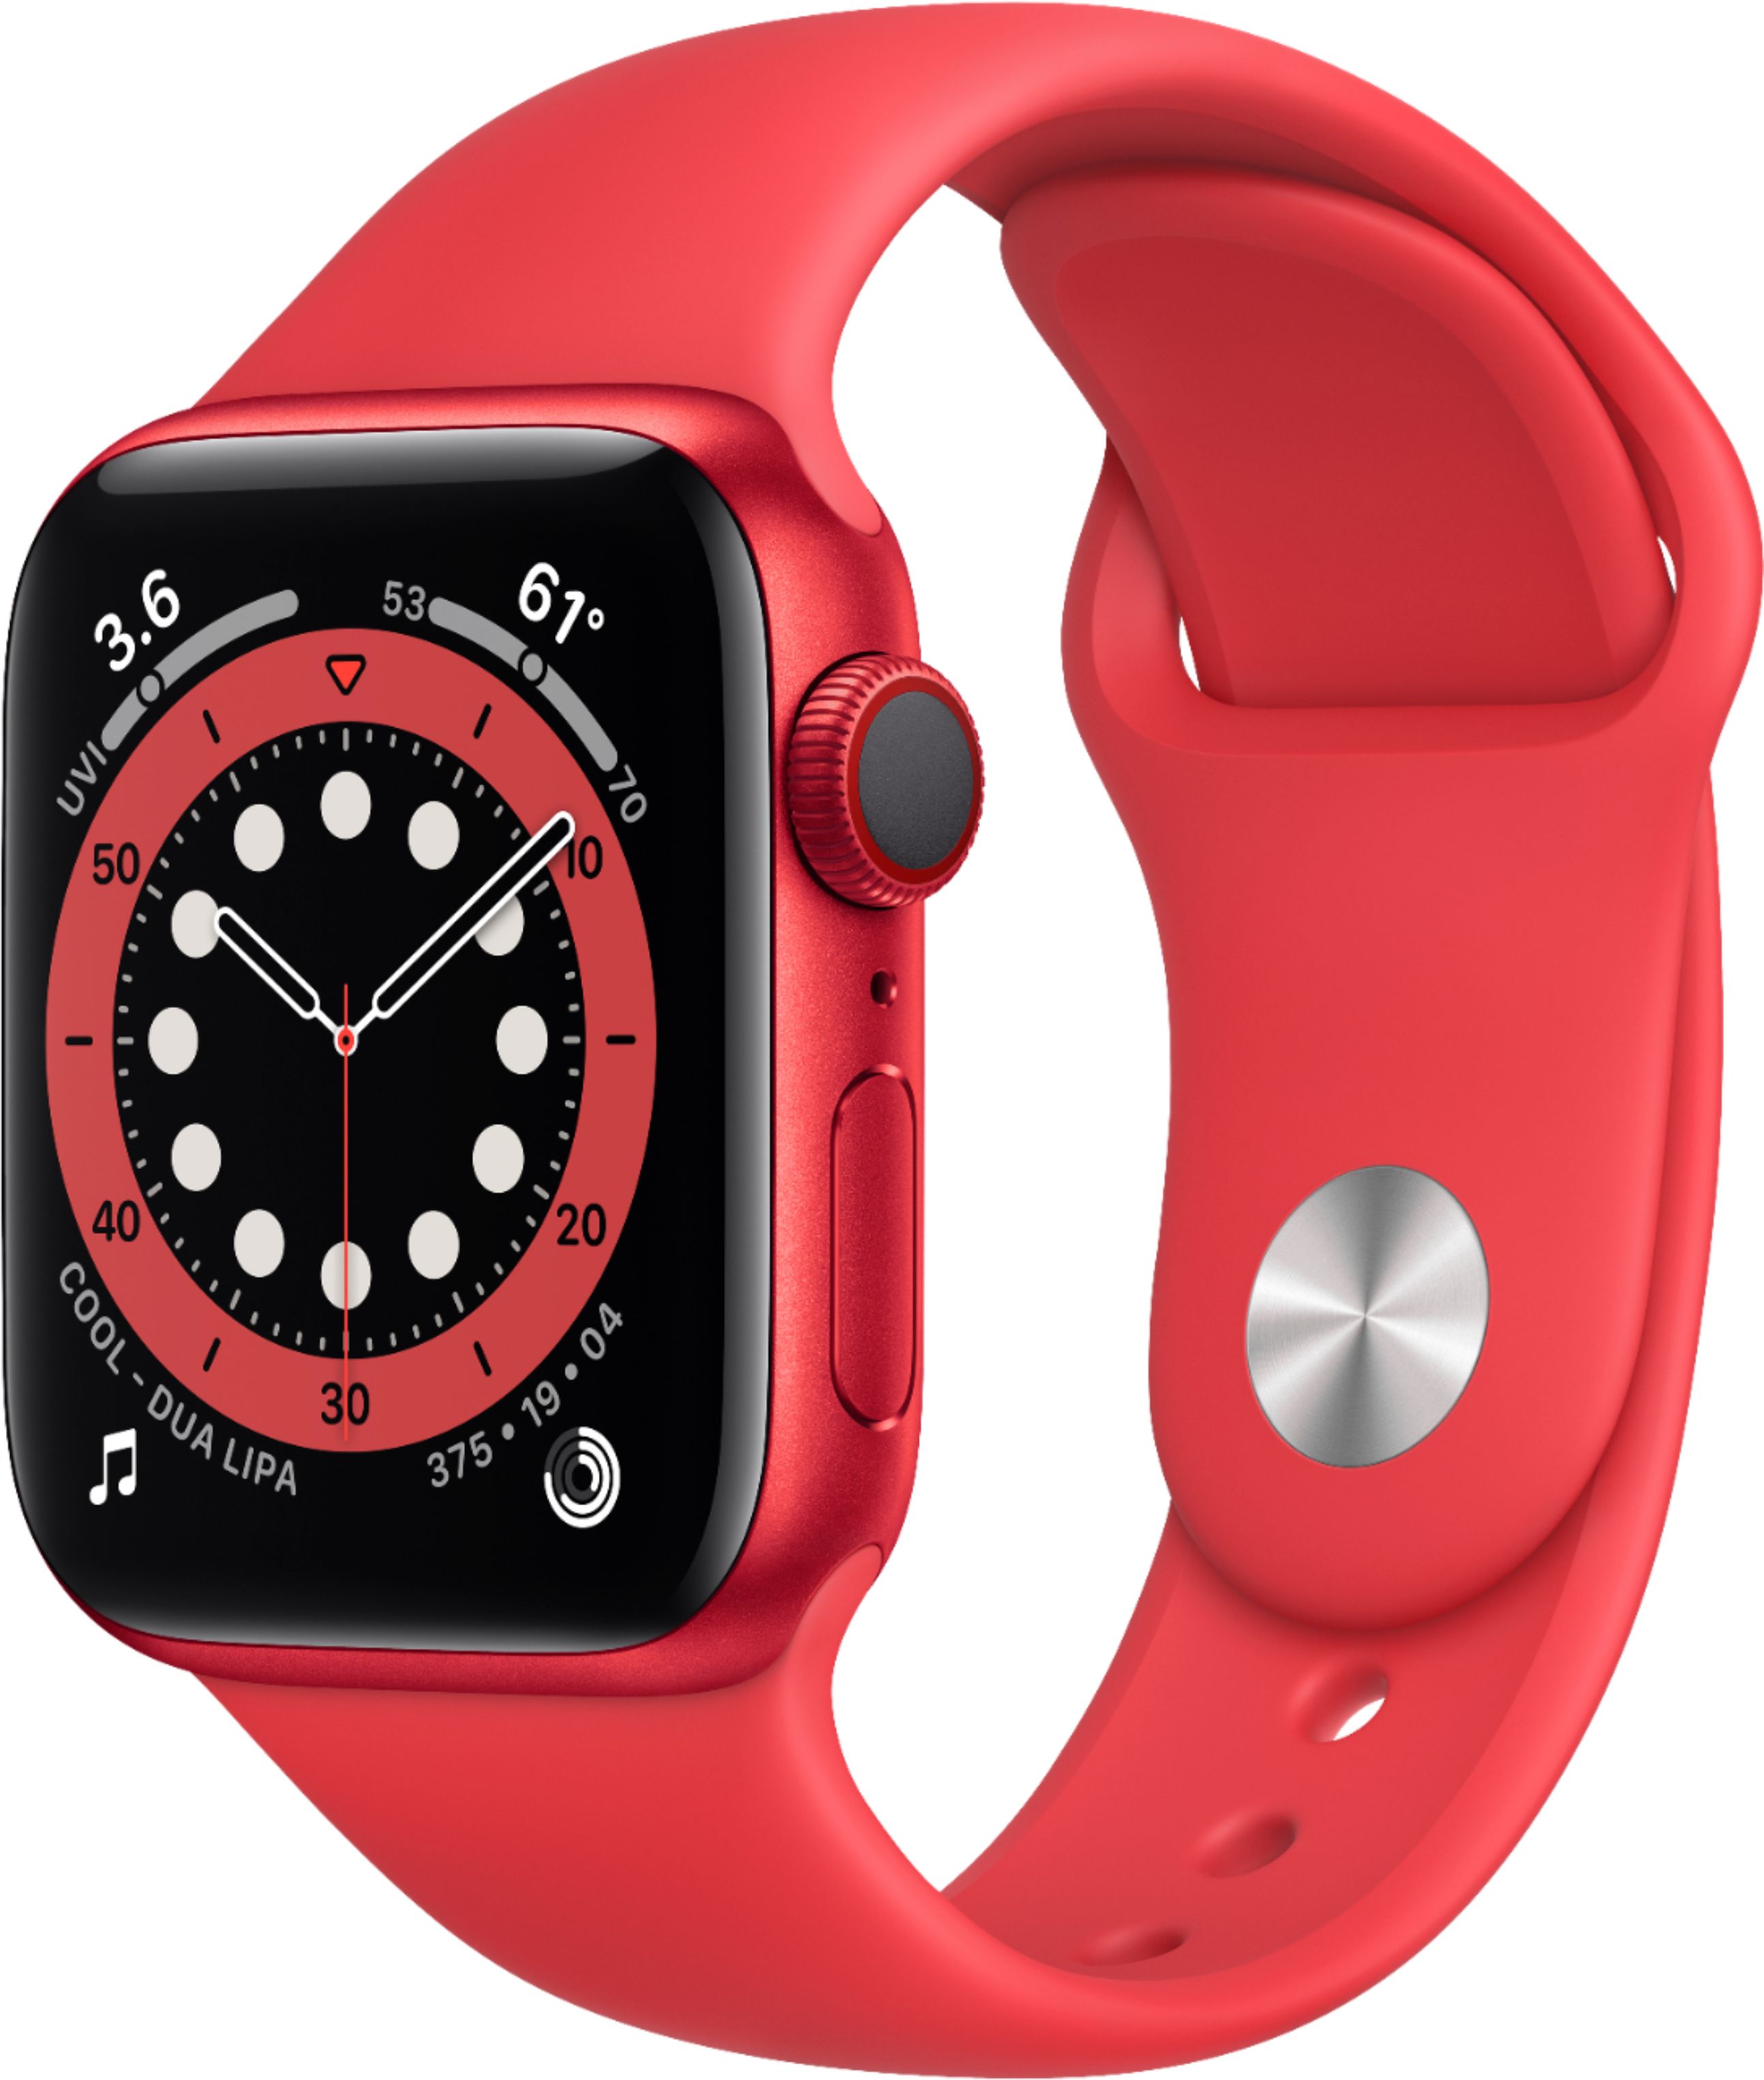 Apple Watch Series 6 (GPS + Cellular) 40mm (PRODUCT)RED Aluminum Case with (PRODUCT)RED Sport Band - (PRODUCT)RED (Verizon)